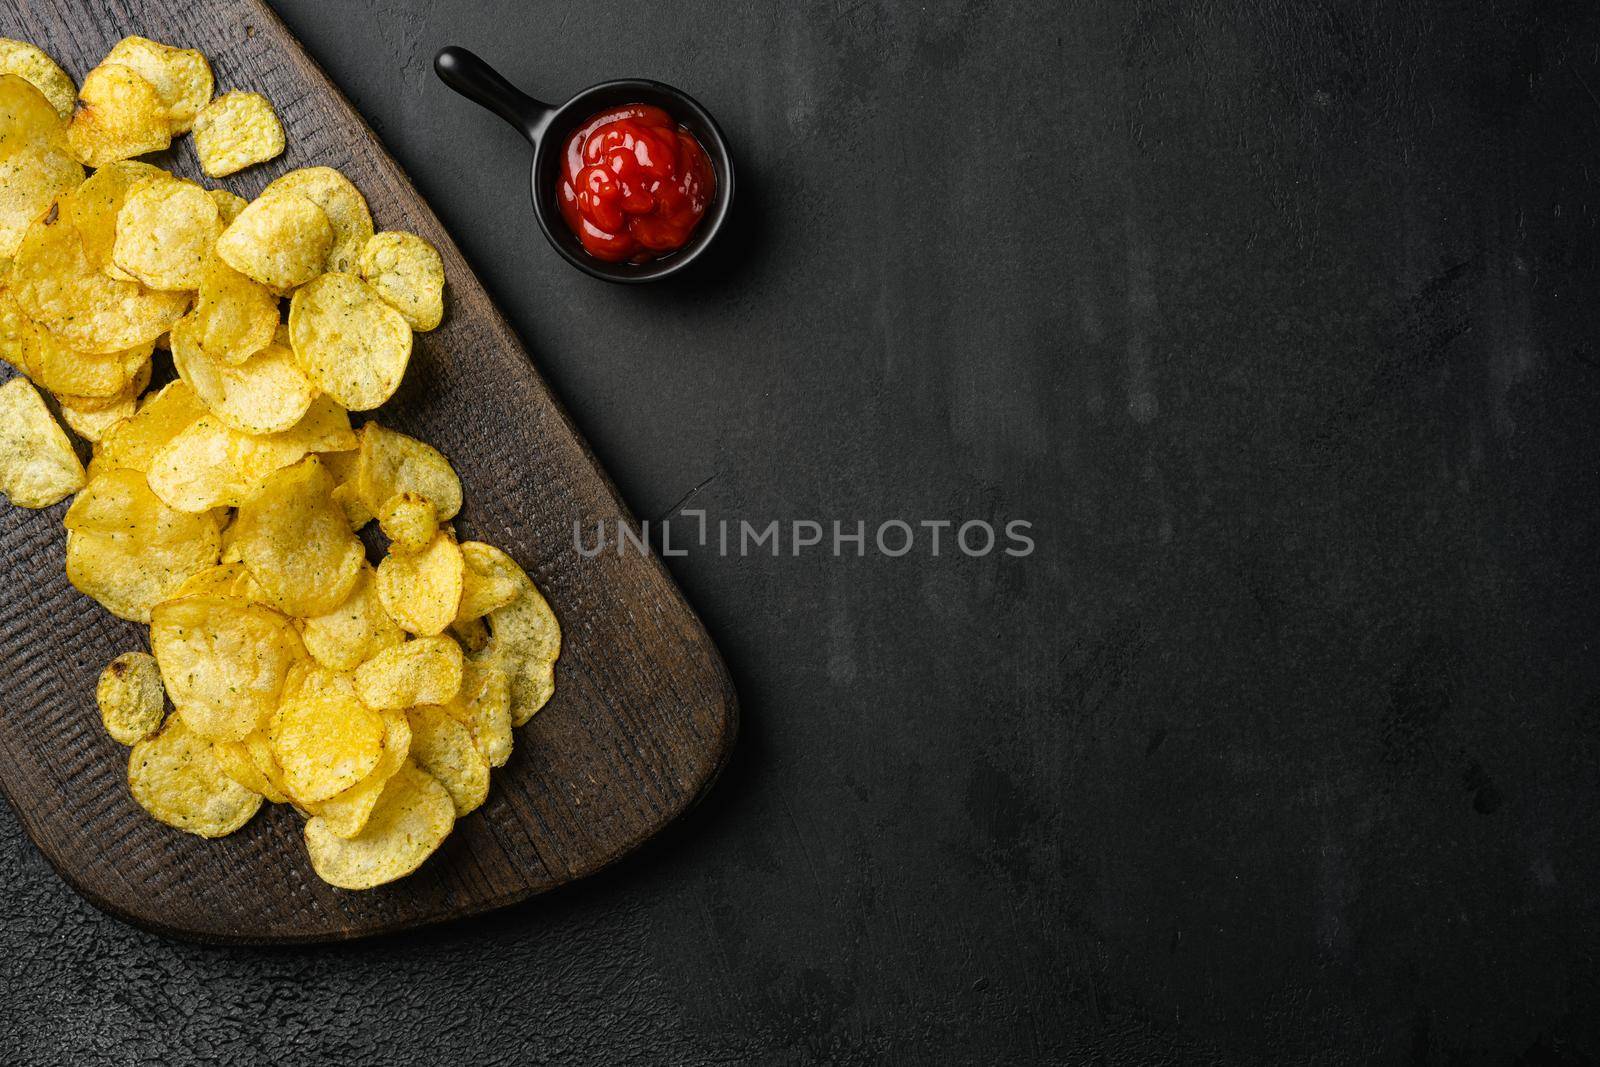 Chesapeake Bay Crab Spice Flavored Potato Chips, on black dark stone table background, top view flat lay, with copy space for text